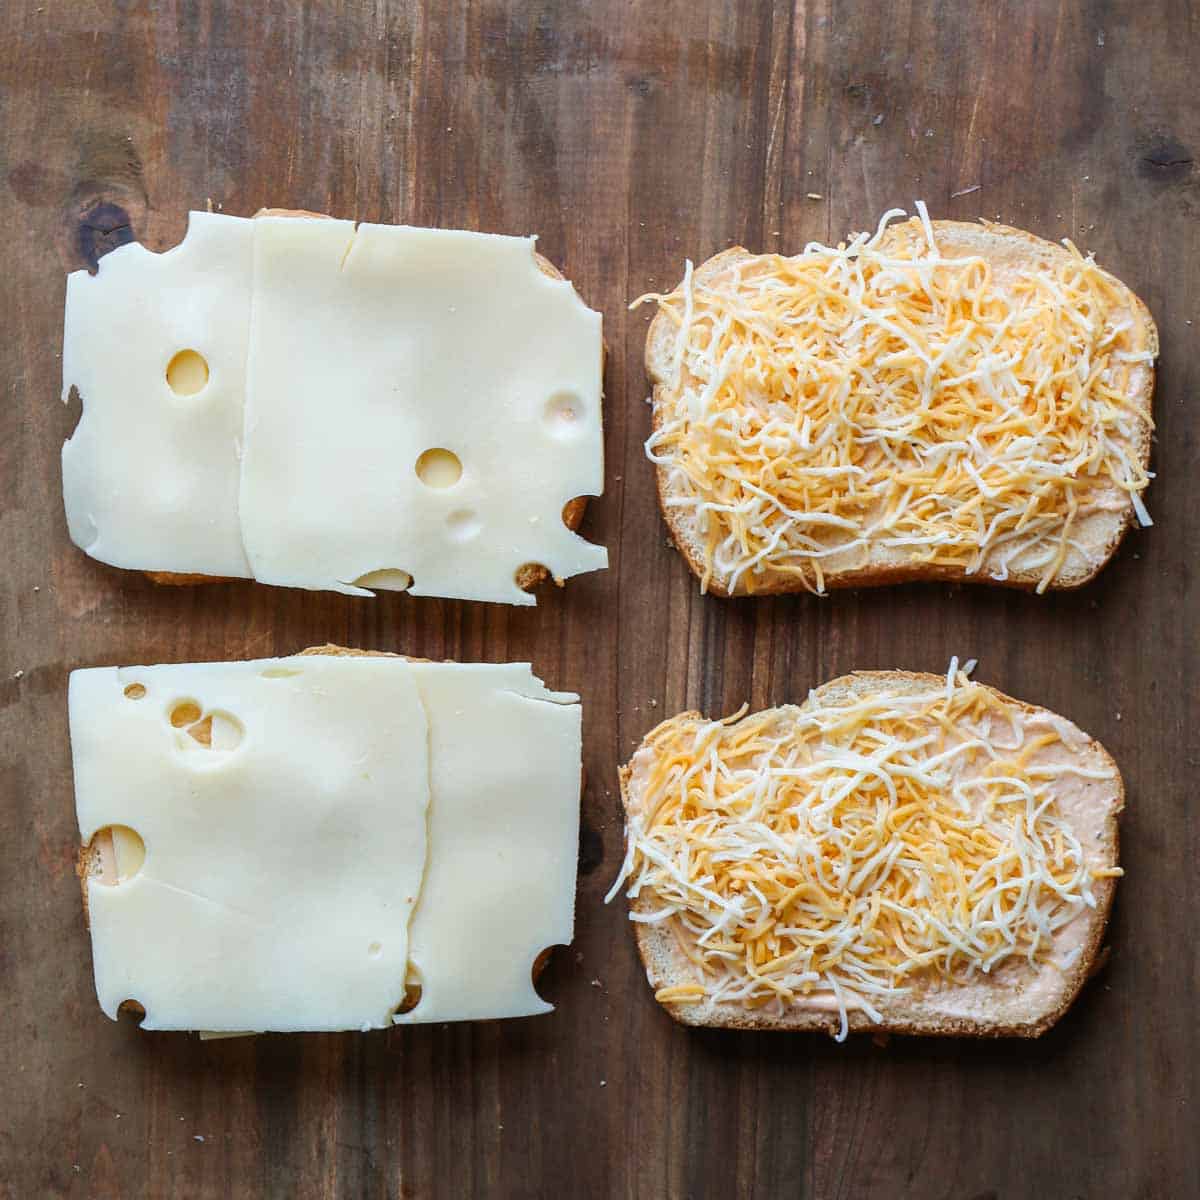 Four slices of bread with the sauce, and cheese, topped with additional shredded cheese. 